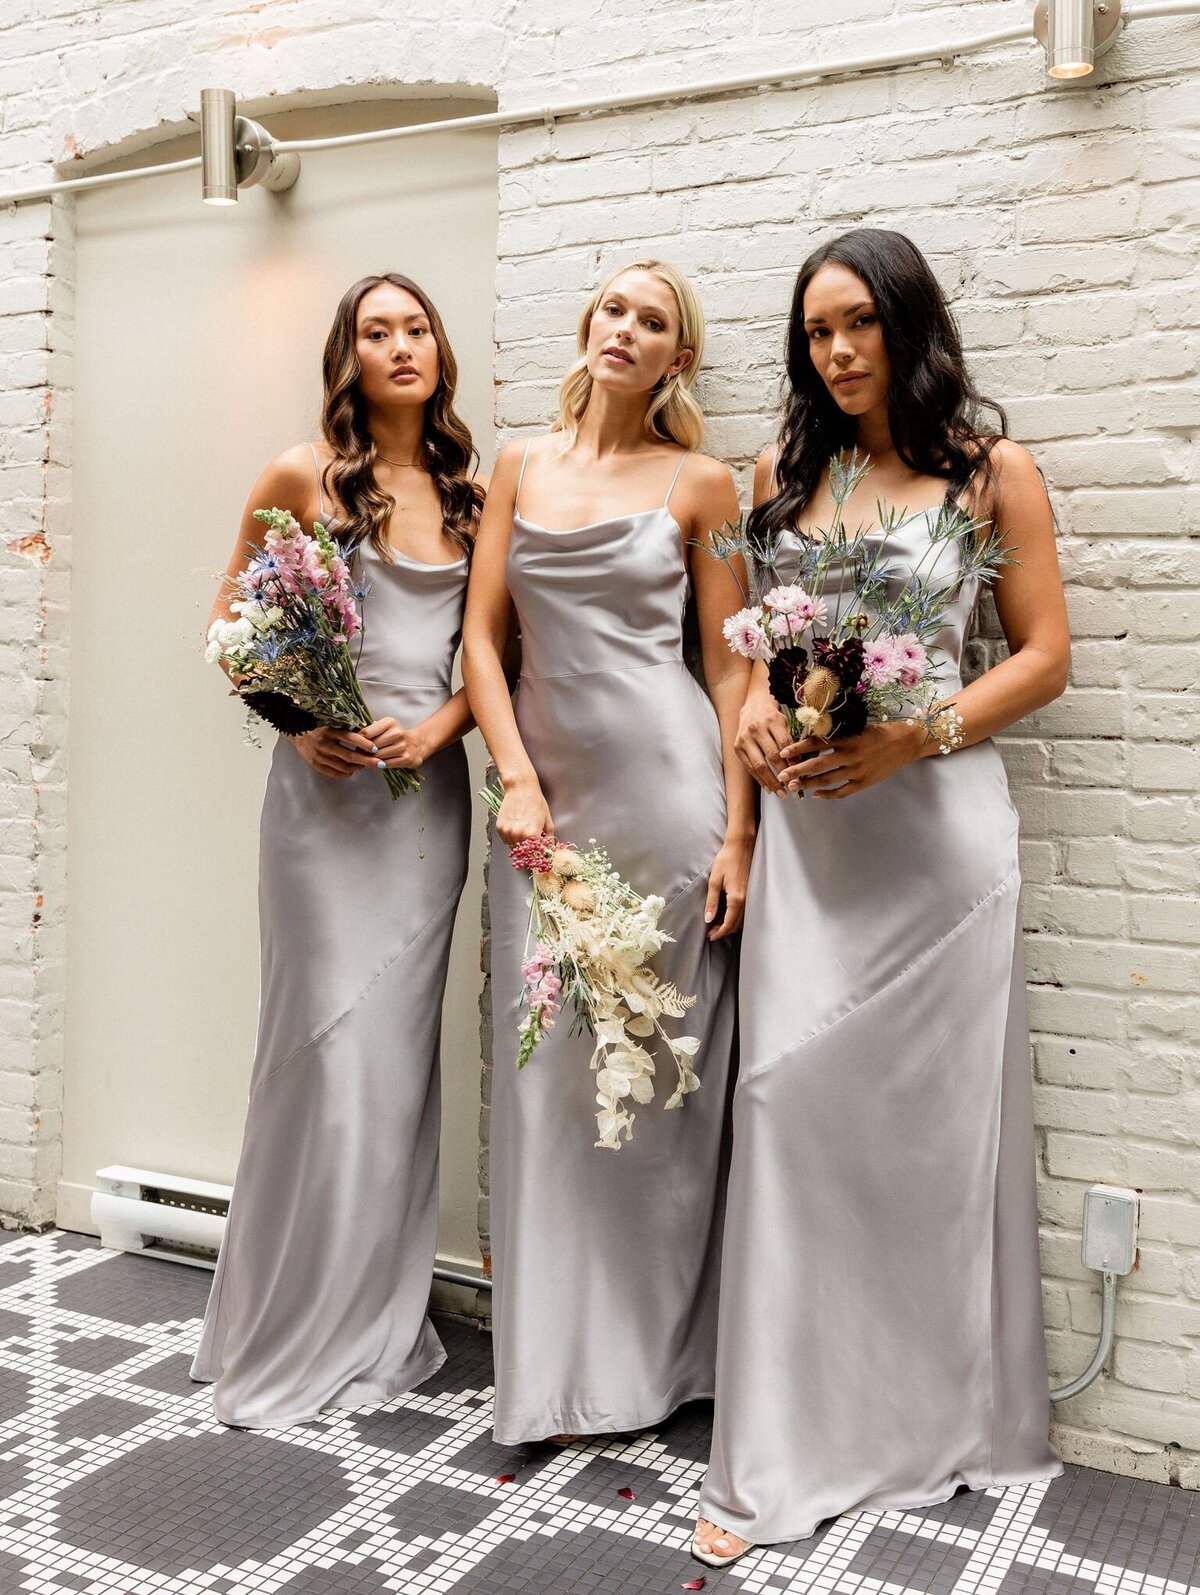 Trendy grey silk bridesmaids dresses from Park & Fifth, a modern bridal boutique based in Calgary, Alberta. Featured on the Brontë Bride Vendor Guide.